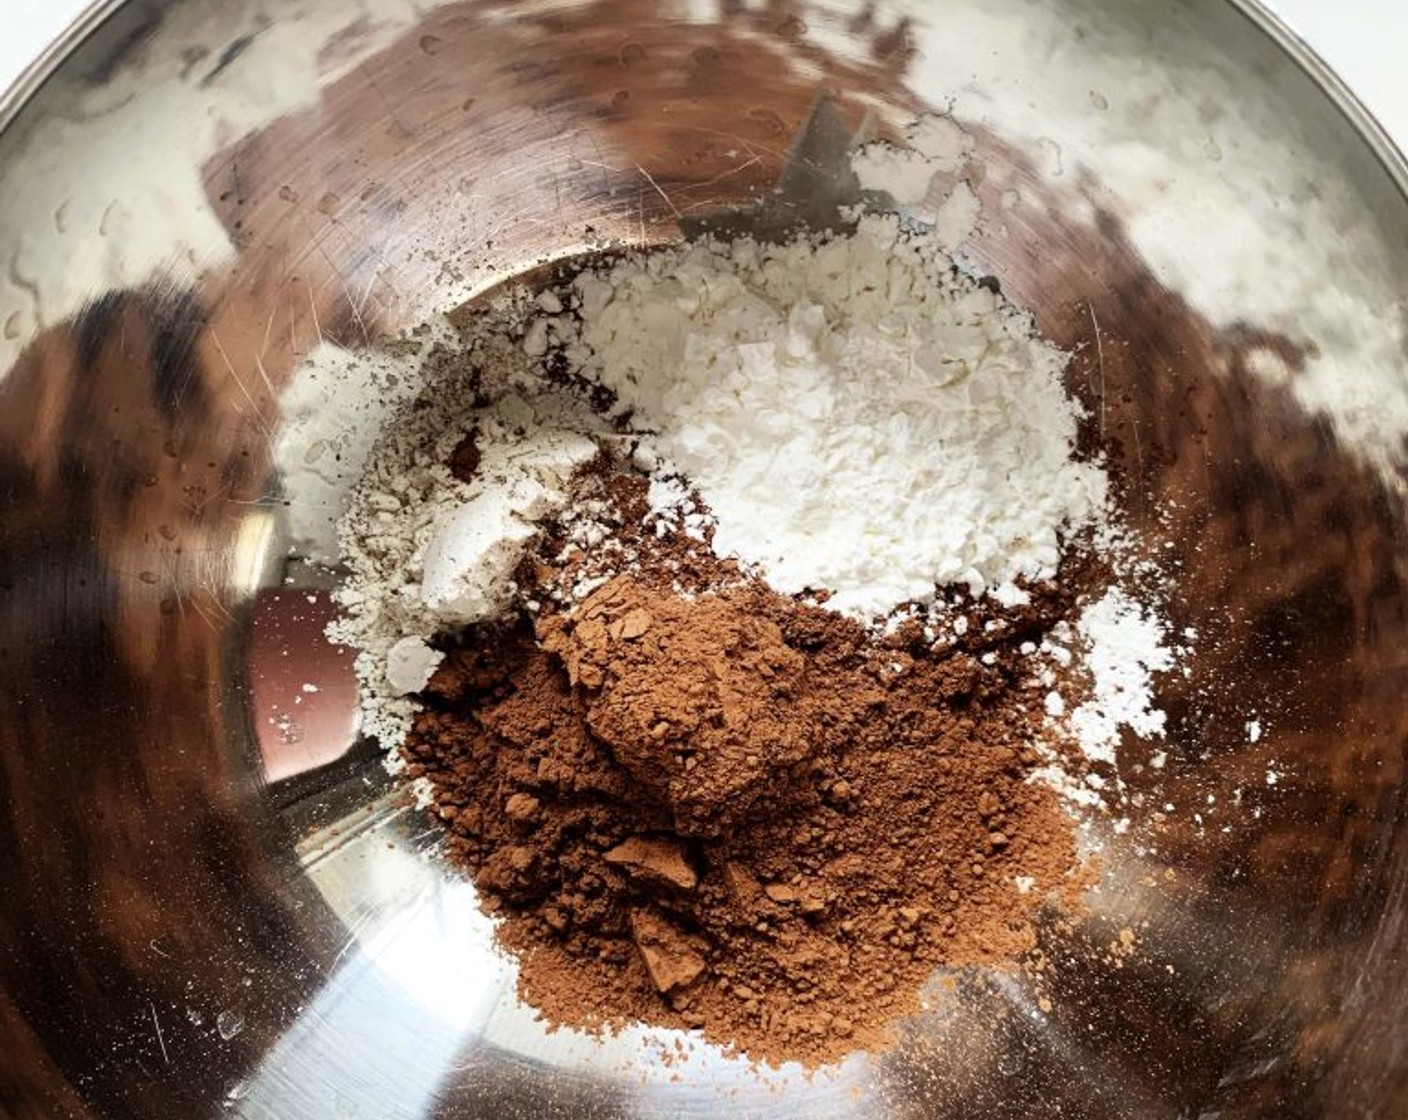 step 1 In a large bowl combine Buckwheat Flour (1/3 cup), Corn Starch (1 Tbsp), Unsweetened Cocoa Powder (3 1/2 Tbsp), and Ground Cinnamon (1 dash).